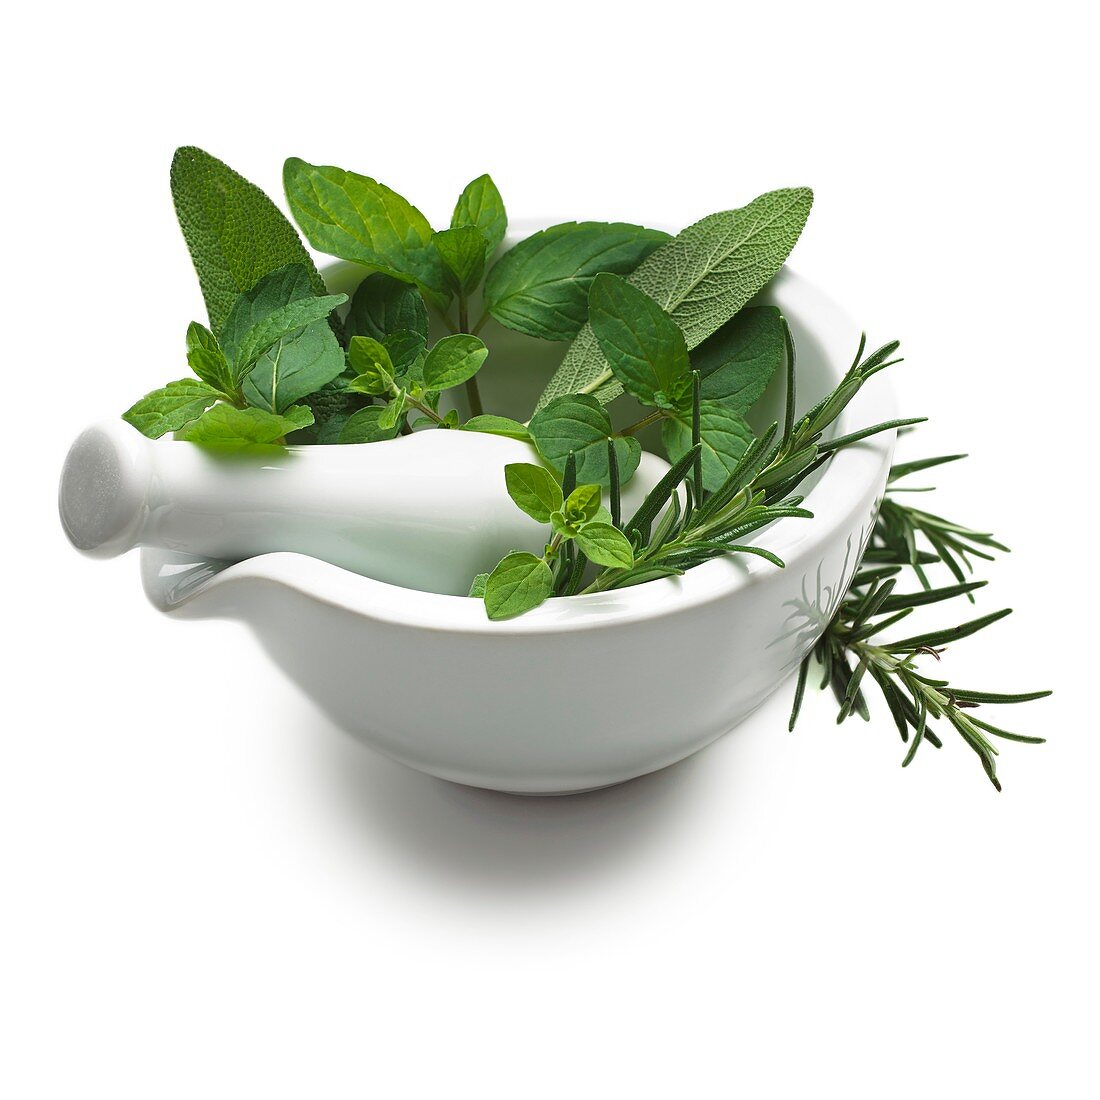 Herbs in a mortar and pestle